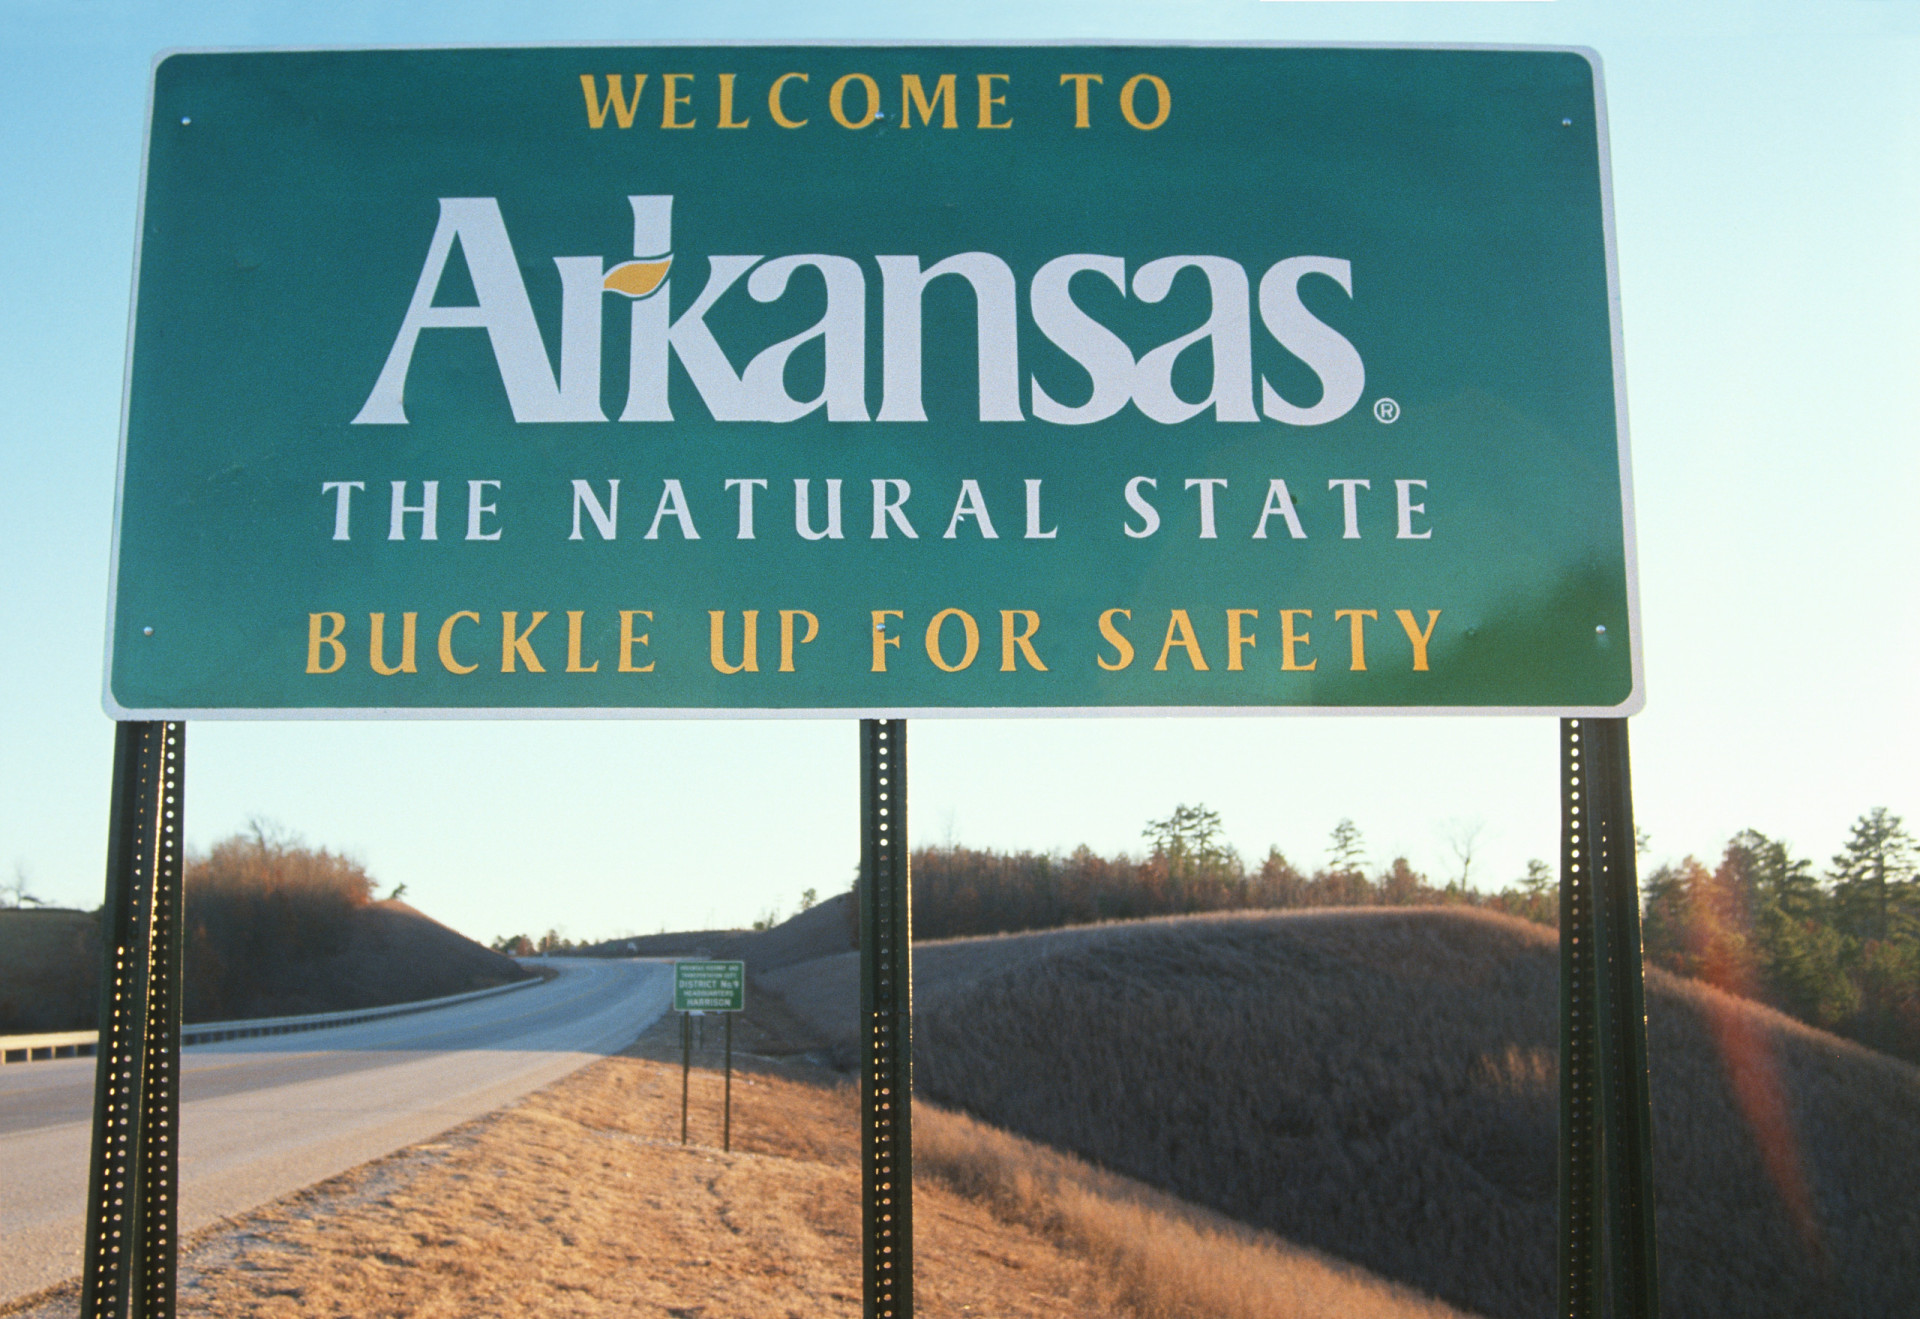 <p>Arkansas is the only state where diamonds are actively mined. Arkansas state law requires all front seat passengers to wear seatbelts (as well as those under 16 in all seats), hence the slogan. </p><p>You may also like:<a href="https://www.starsinsider.com/n/189437?utm_source=msn.com&utm_medium=display&utm_campaign=referral_description&utm_content=572689en-en"> Weird food Aussies eat that leave the rest of the world dumbfounded </a></p>